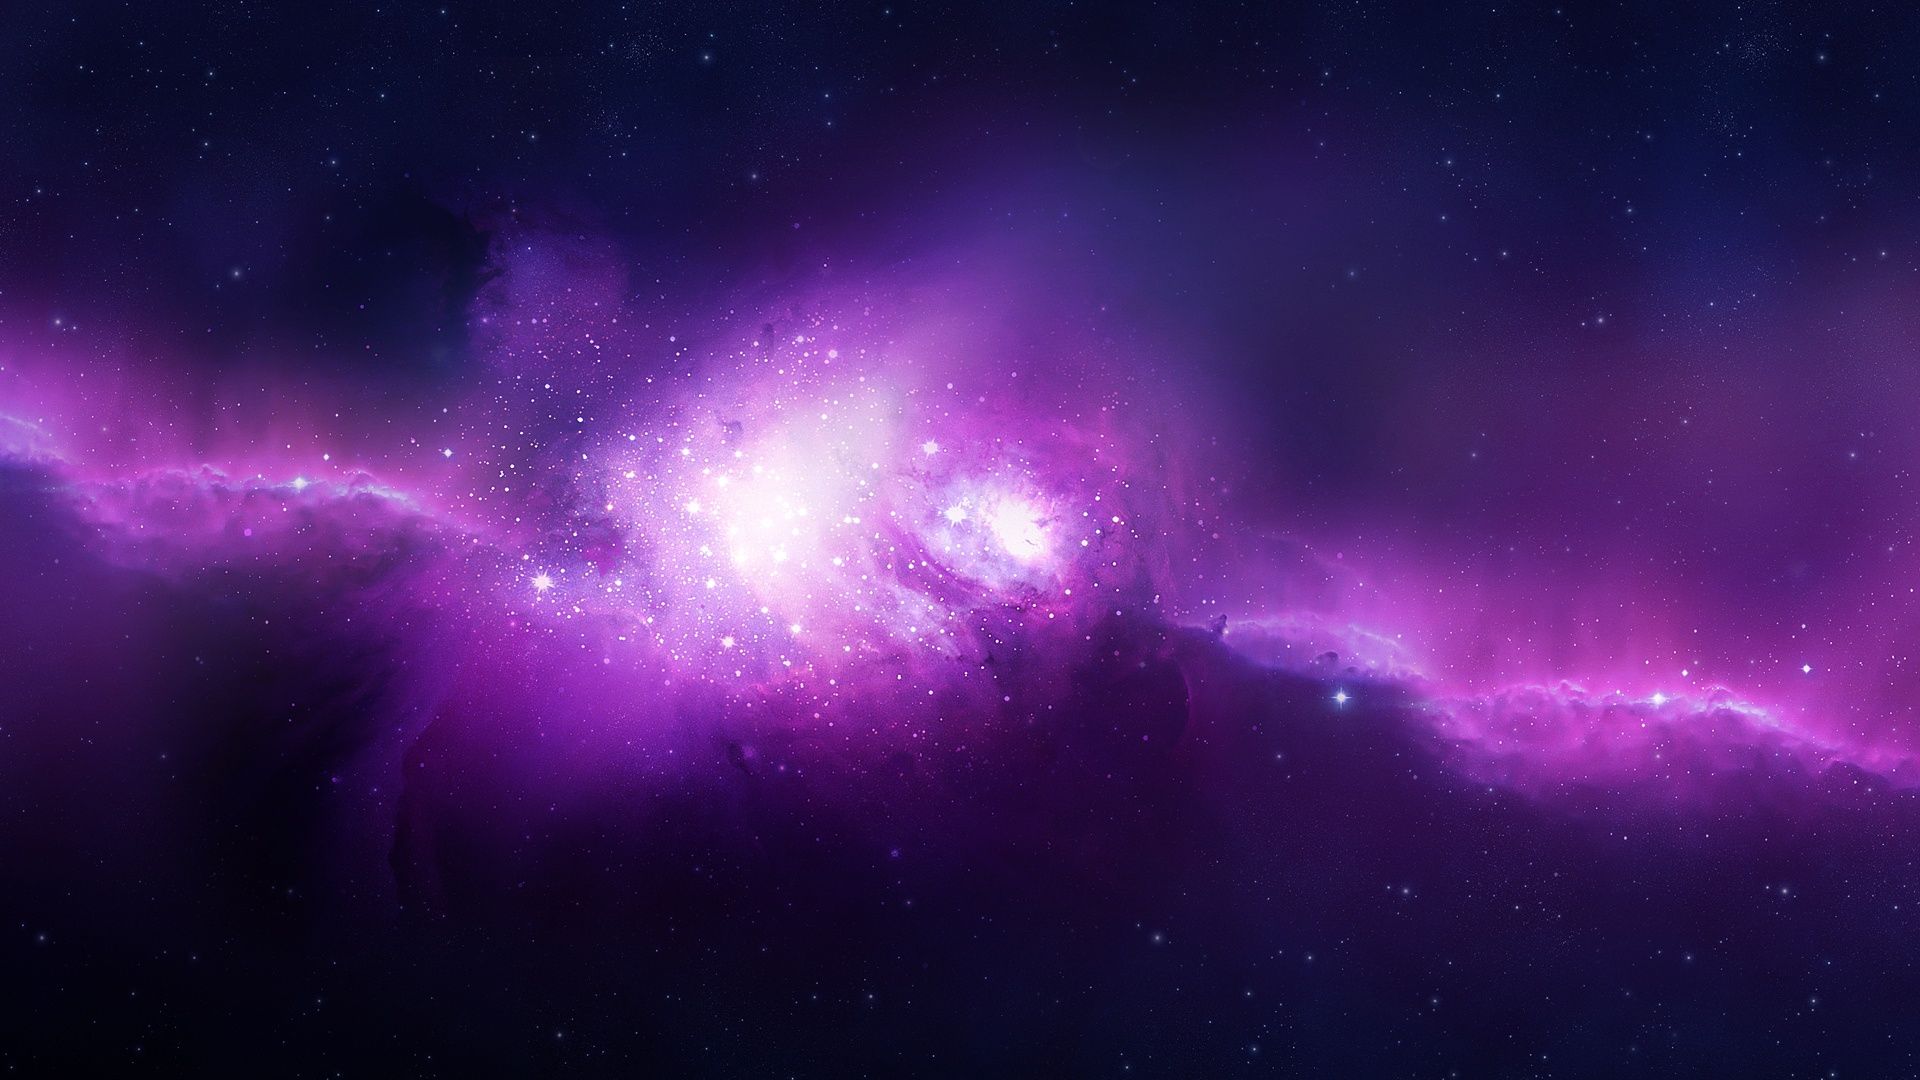 Space Nebulae Wallpaper in jpg format for free download